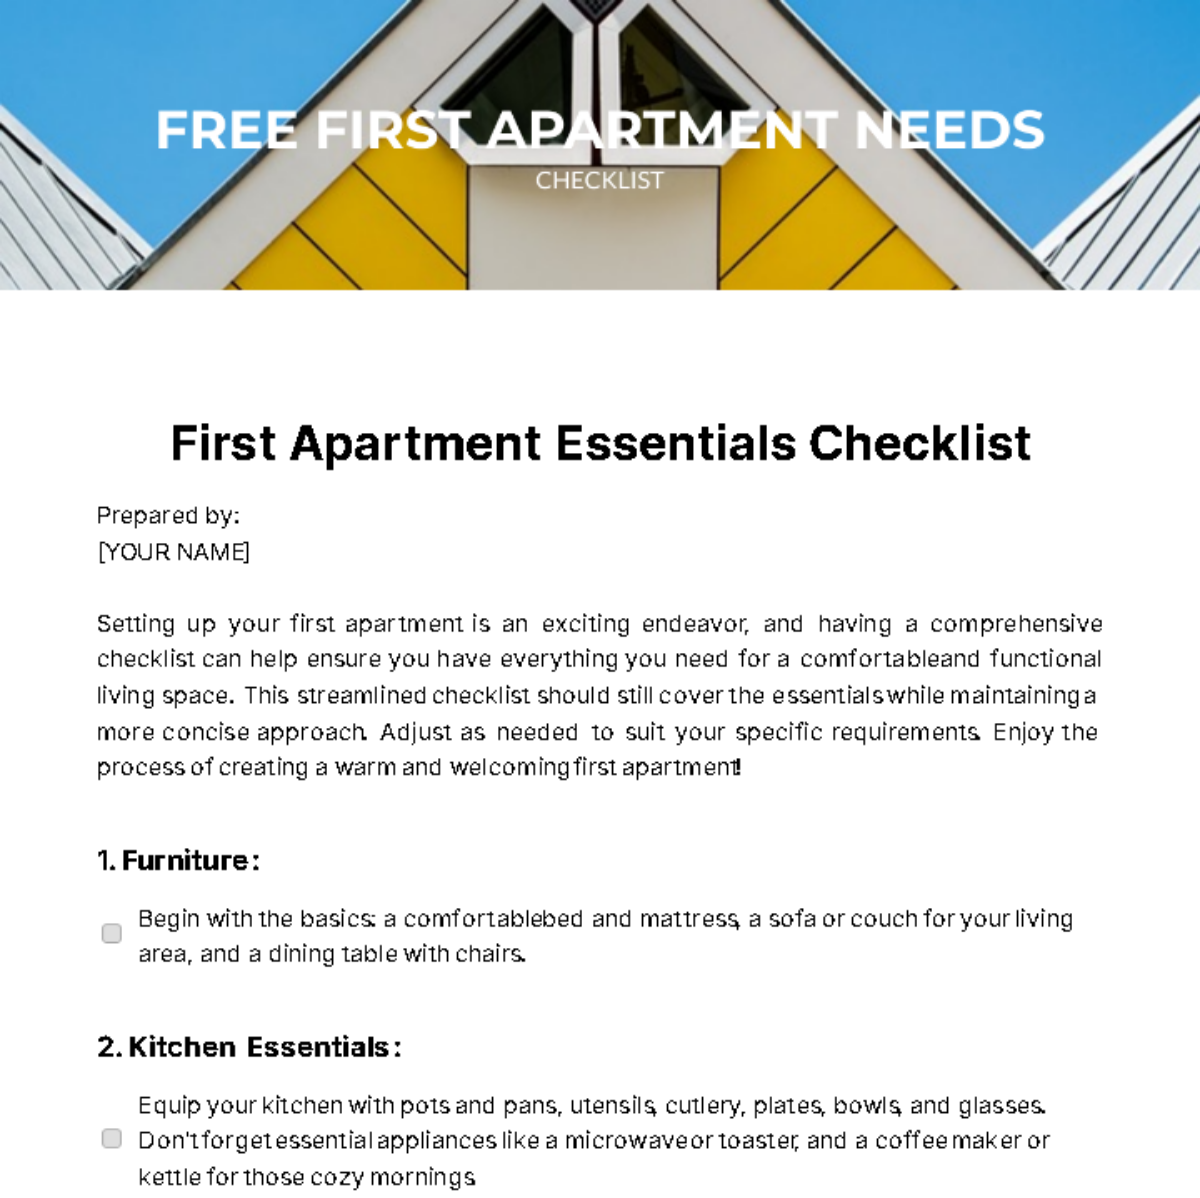 Free First Apartment Needs Checklist Template